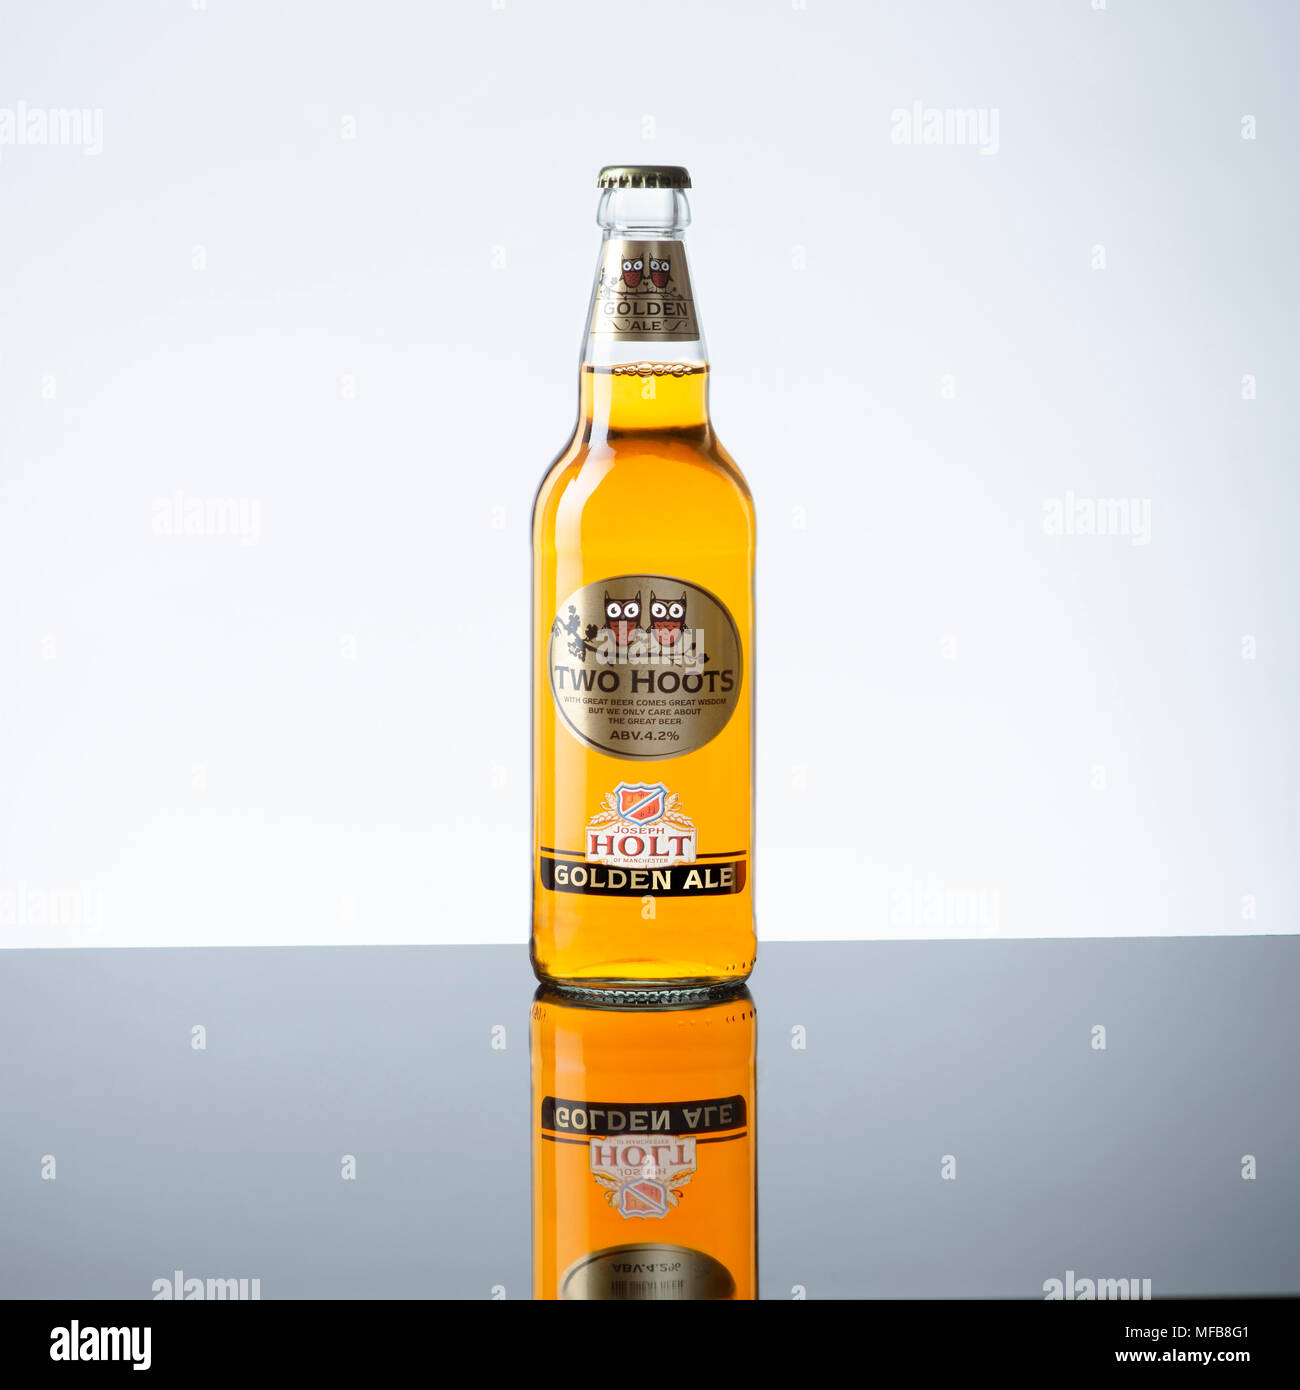 A bottle of Manchester brewery Joseph Holt's Two hoots beer. Credit Lee Ramsden / Alamy Stock Photo